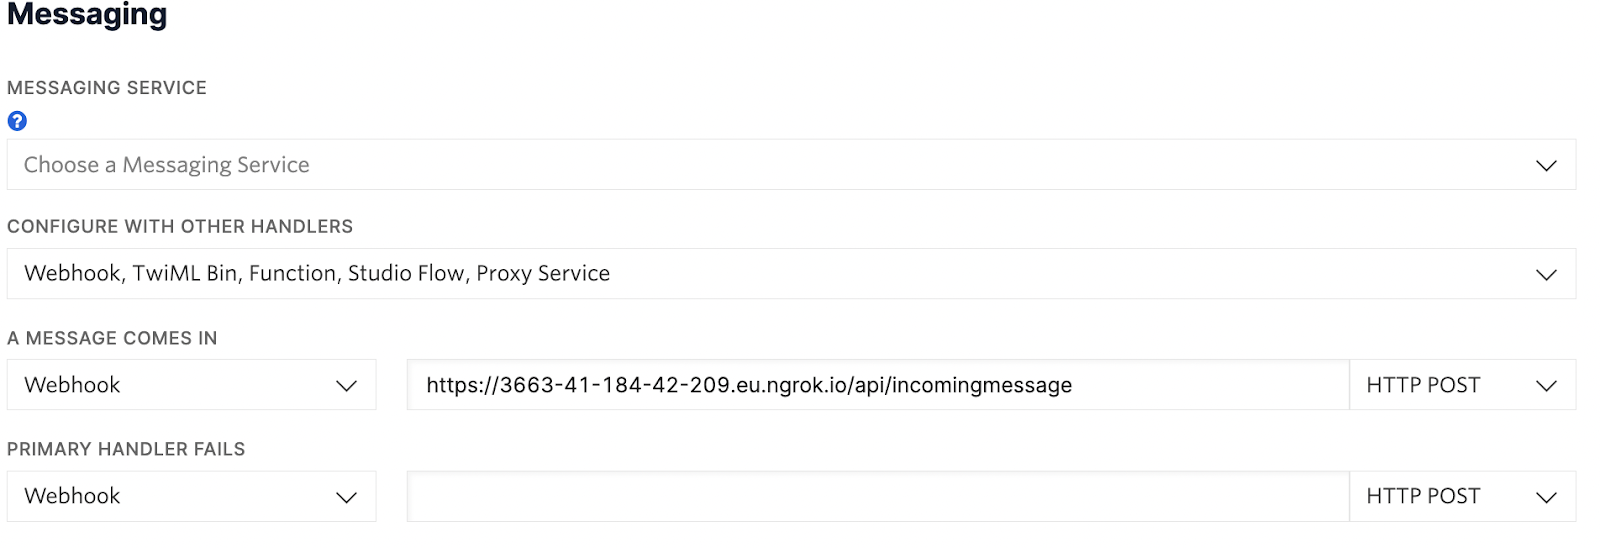 Twilio Phone Number Messaging section where you can configure the webhook URL for incoming messages.